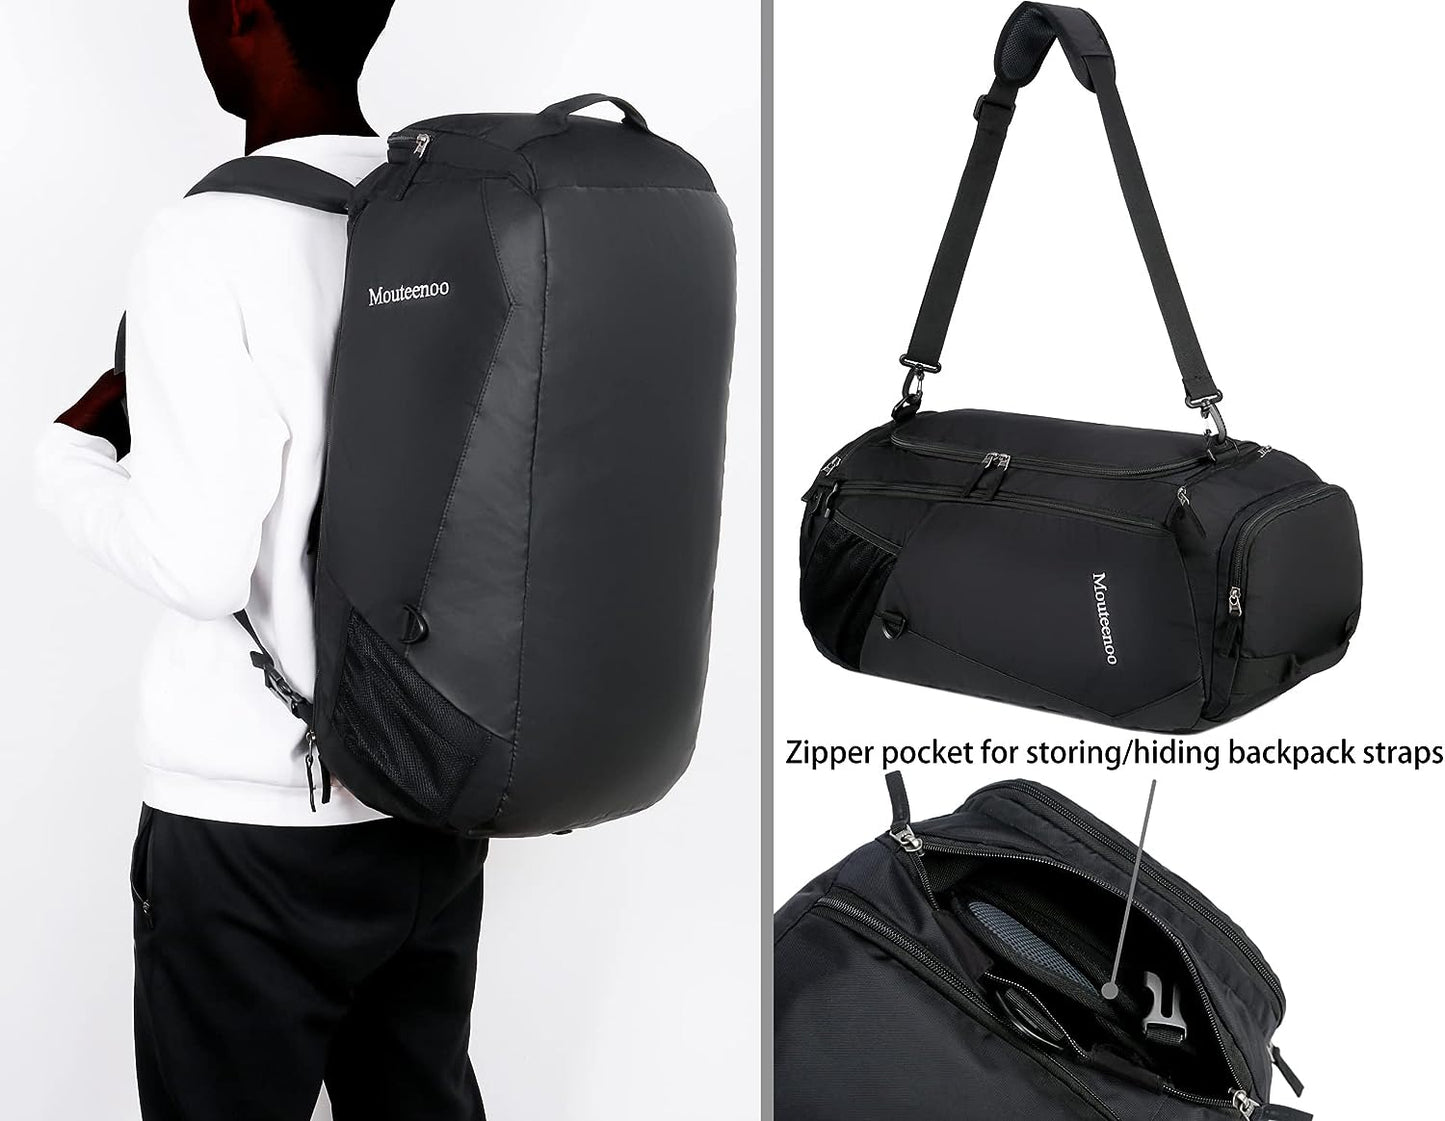 AUTHENTIC Travel Duffel Backpack with Shoes Compartment Water Resistant Sports Duffle Gym Bag With Shoulder Straps for Men and Women